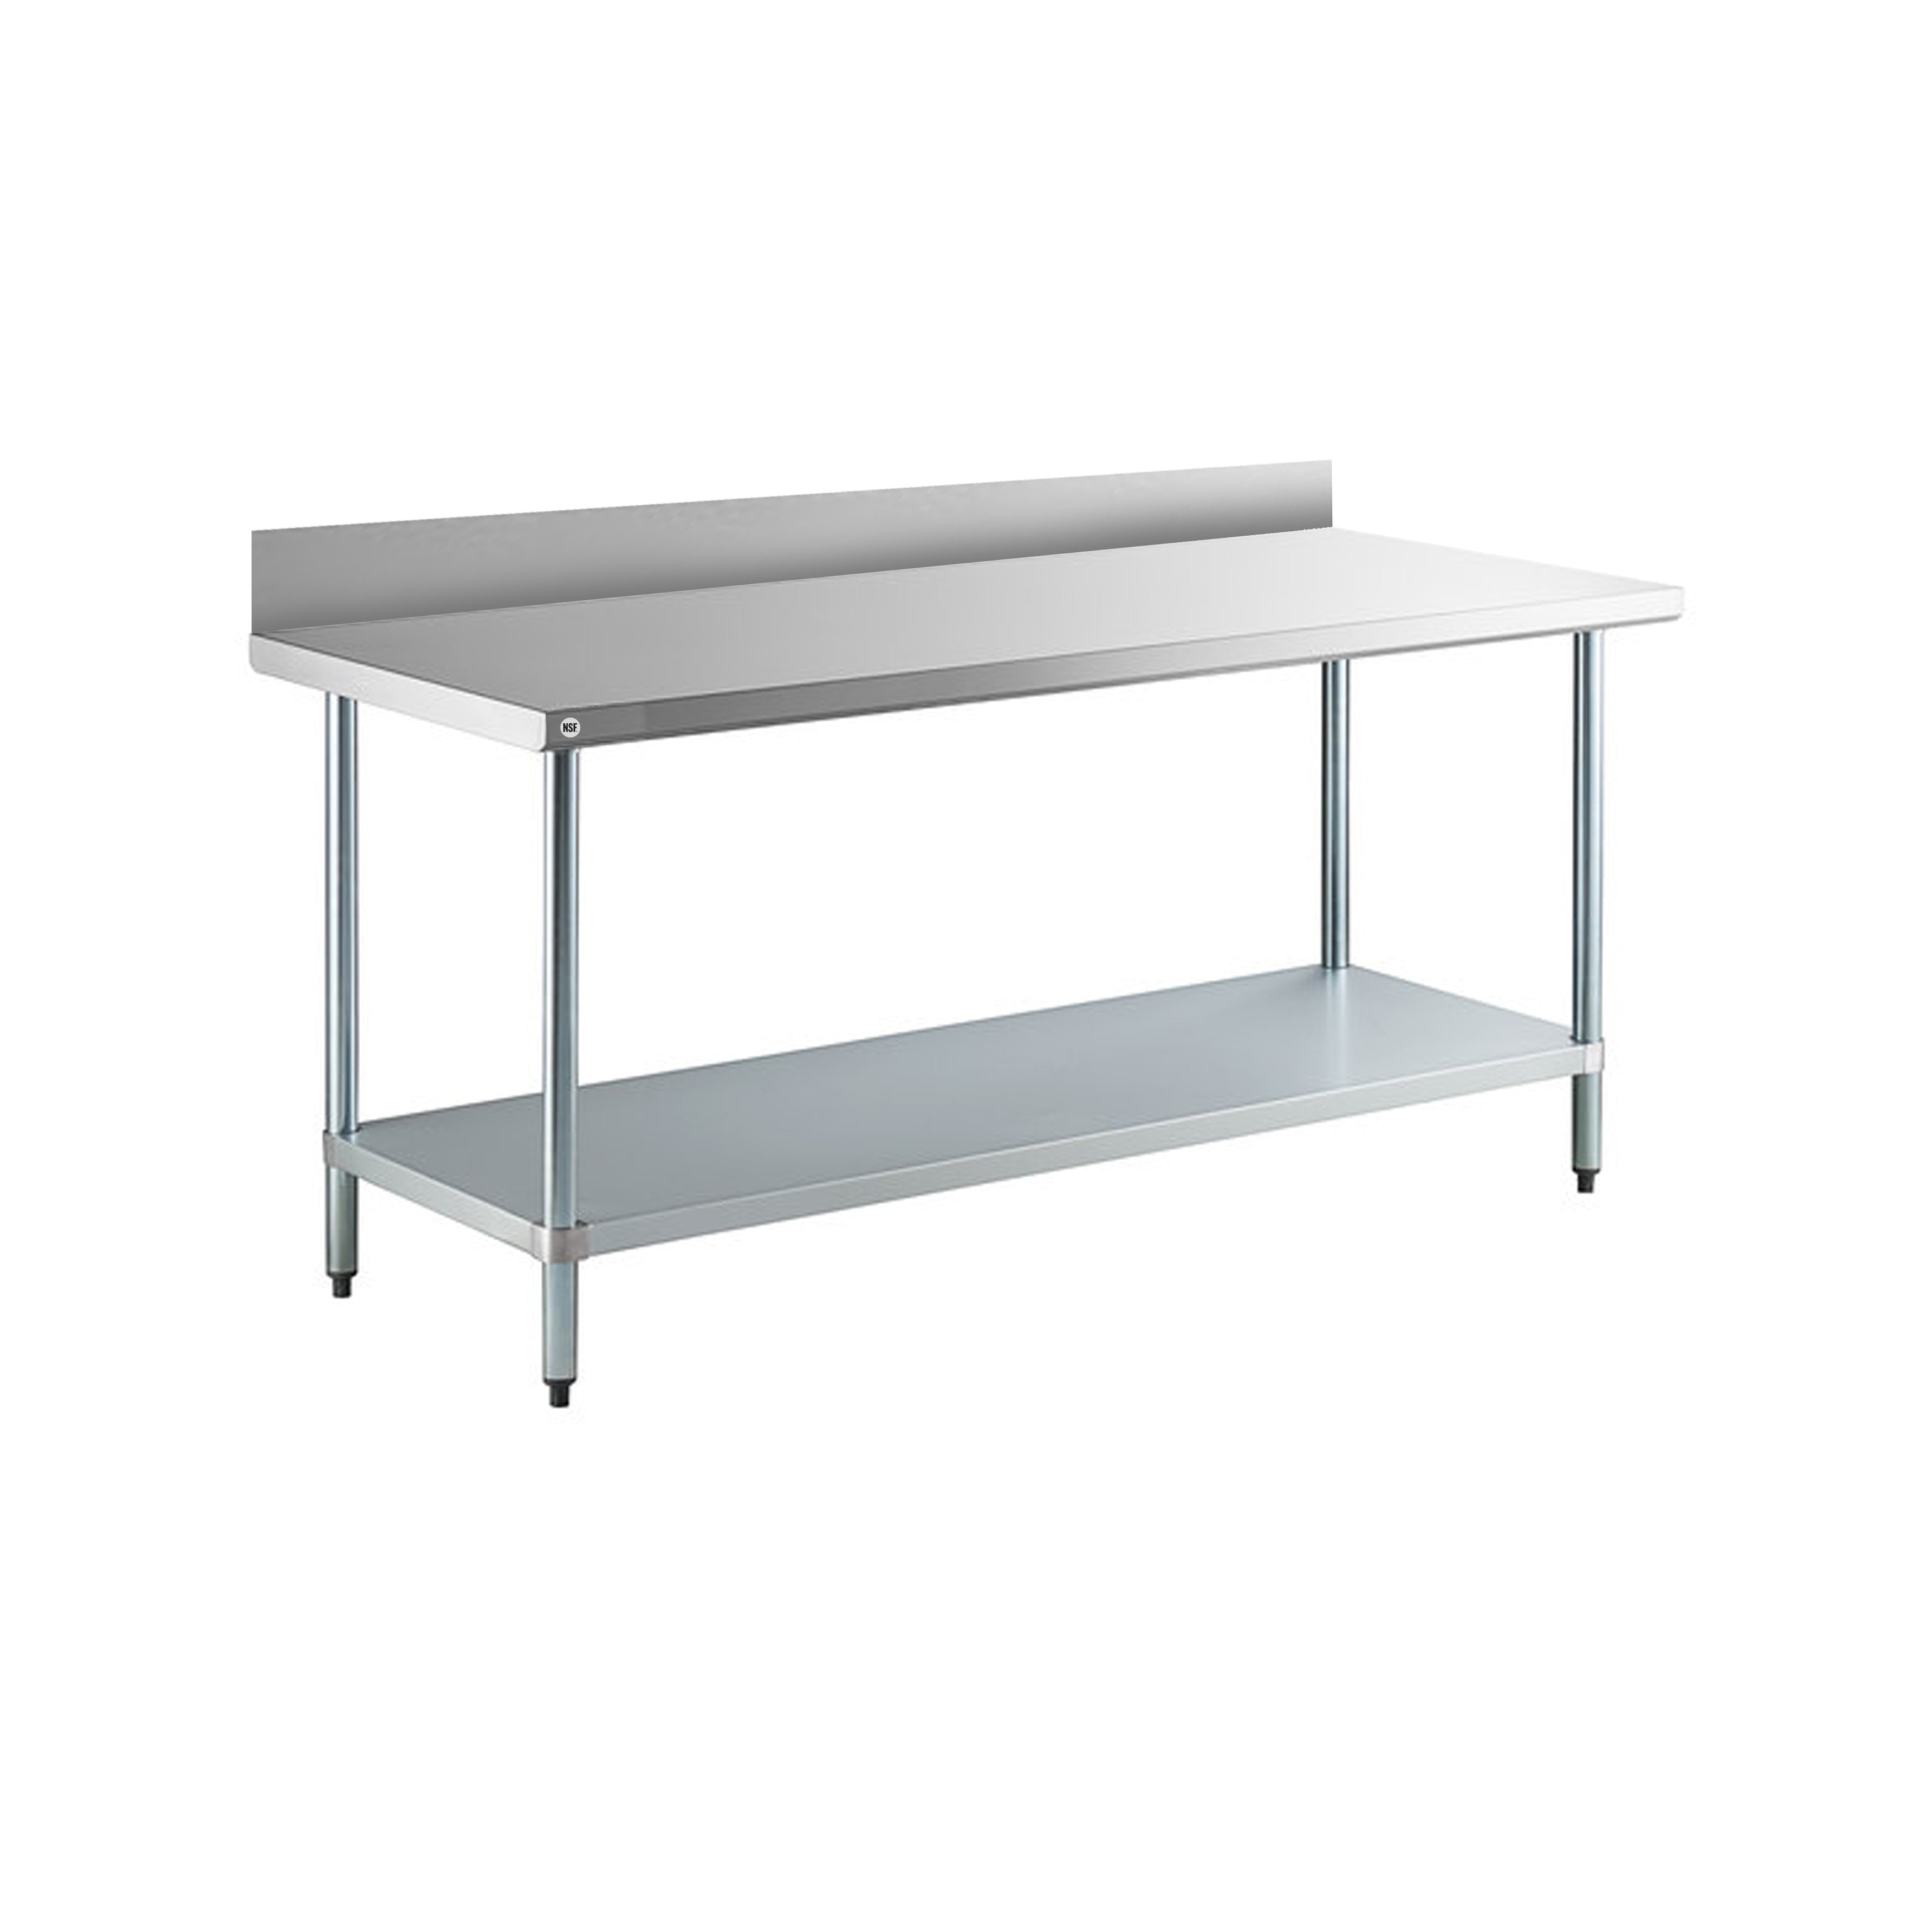 Omcan - 22088, Commercial 30" x 48" Stainless Steel Kitchen Work Table with 4" BackSplash 1100lbs Light Duty